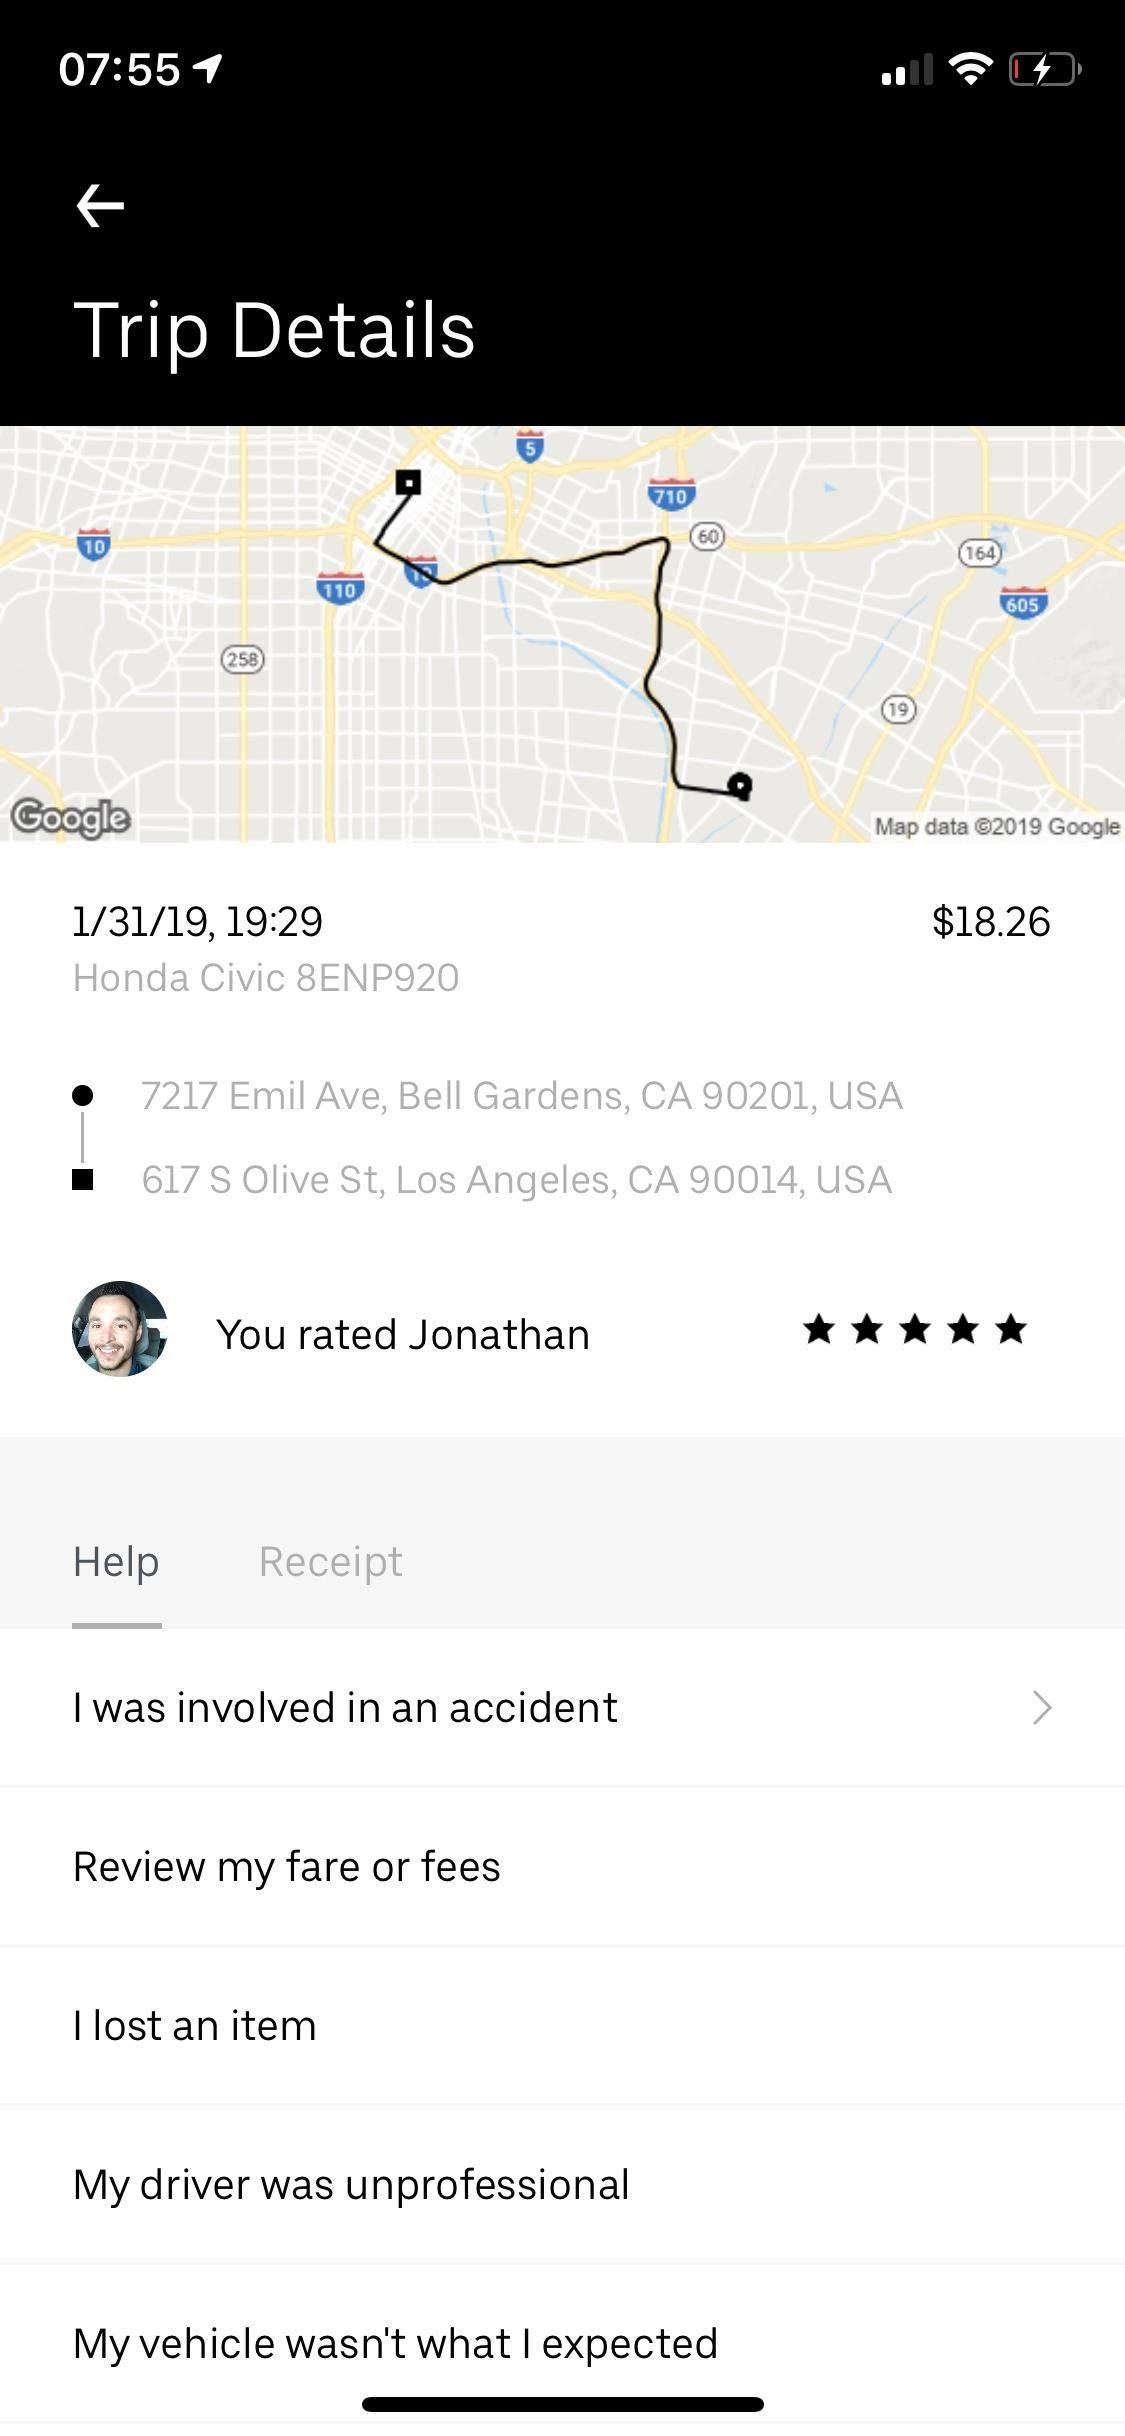 How to Get Your Lost Item Back from an Uber Driver (& What to Do if They Don't Respond)